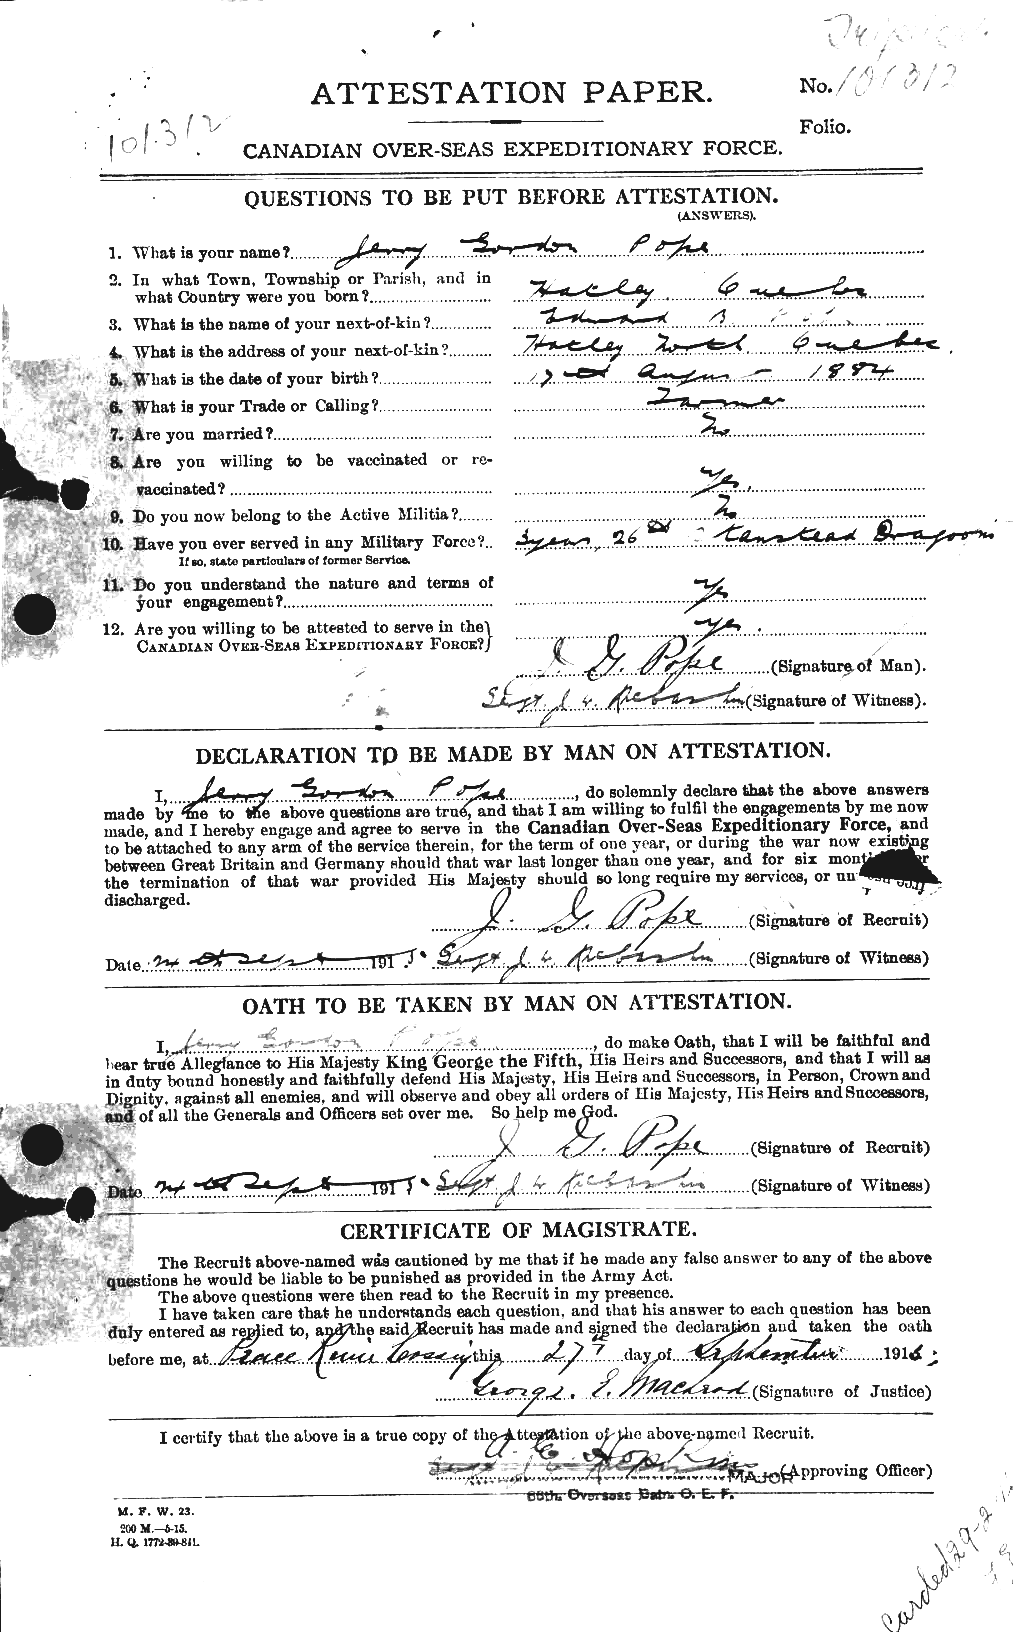 Personnel Records of the First World War - CEF 581496a